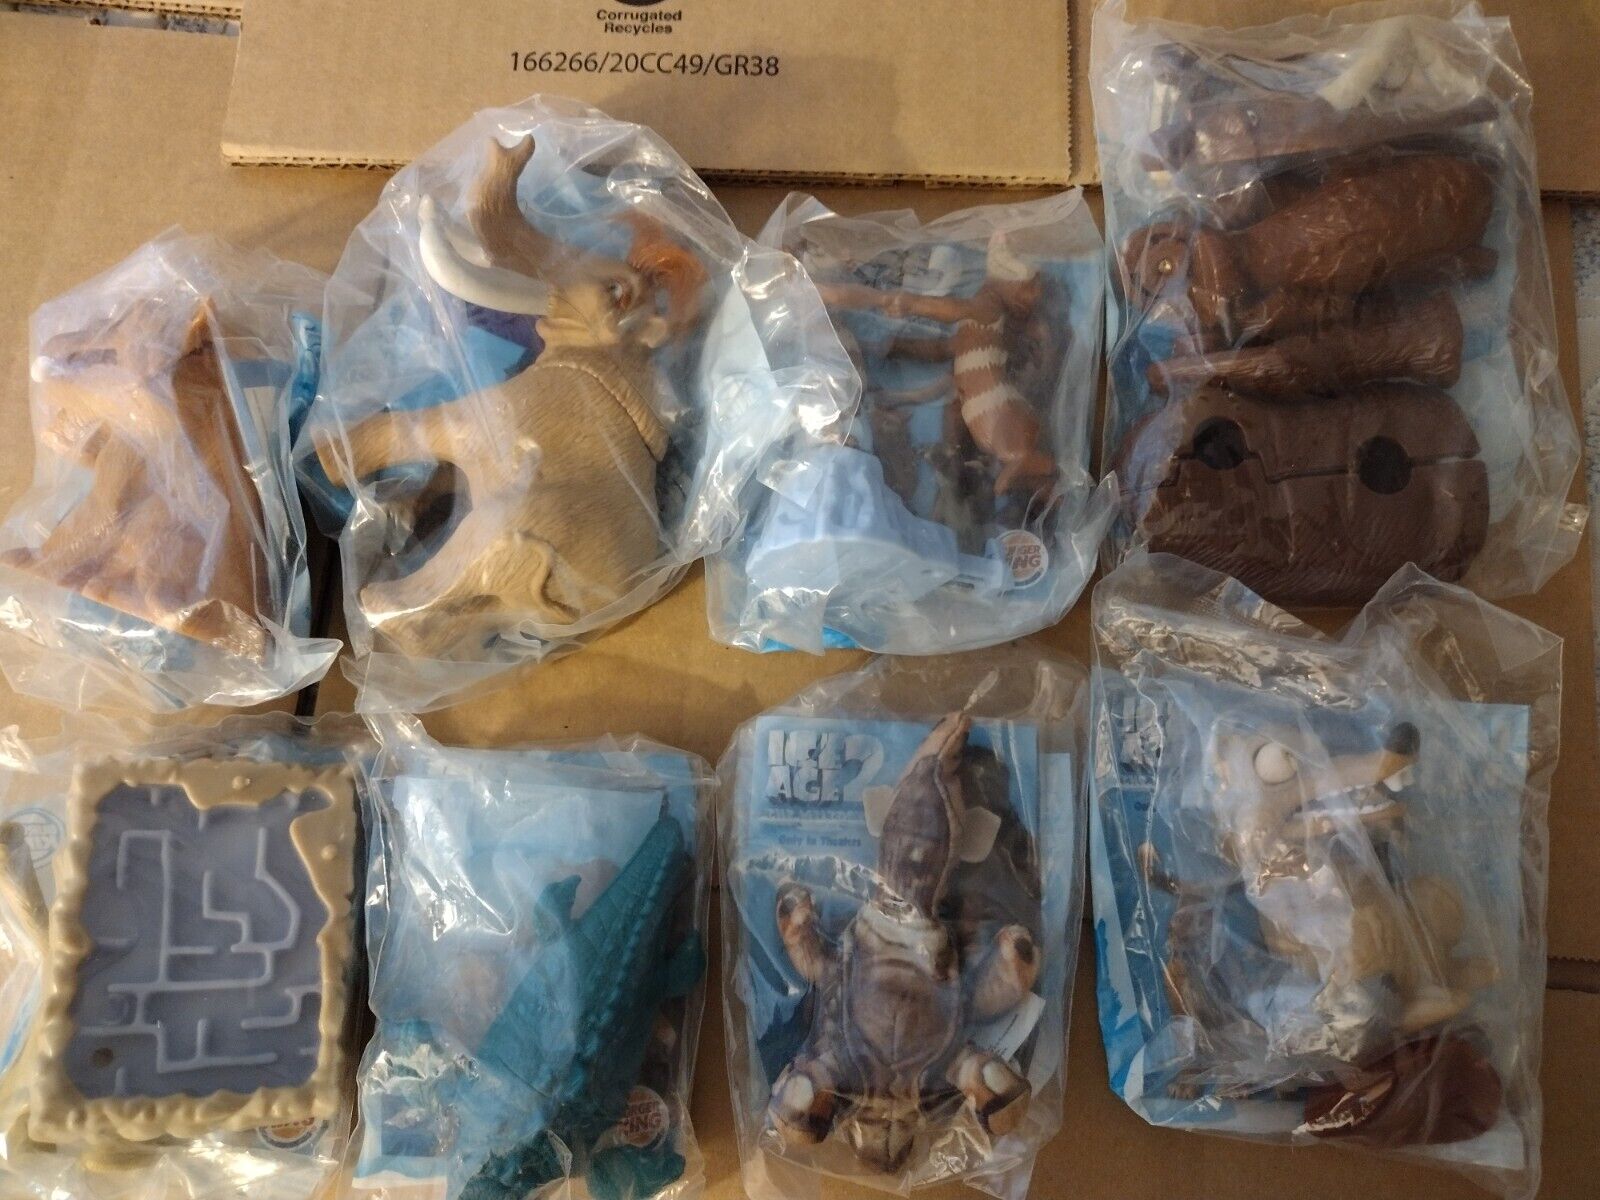 Ice Age 2 Burger King Kids Toys Set  Of 8 missing too see picture